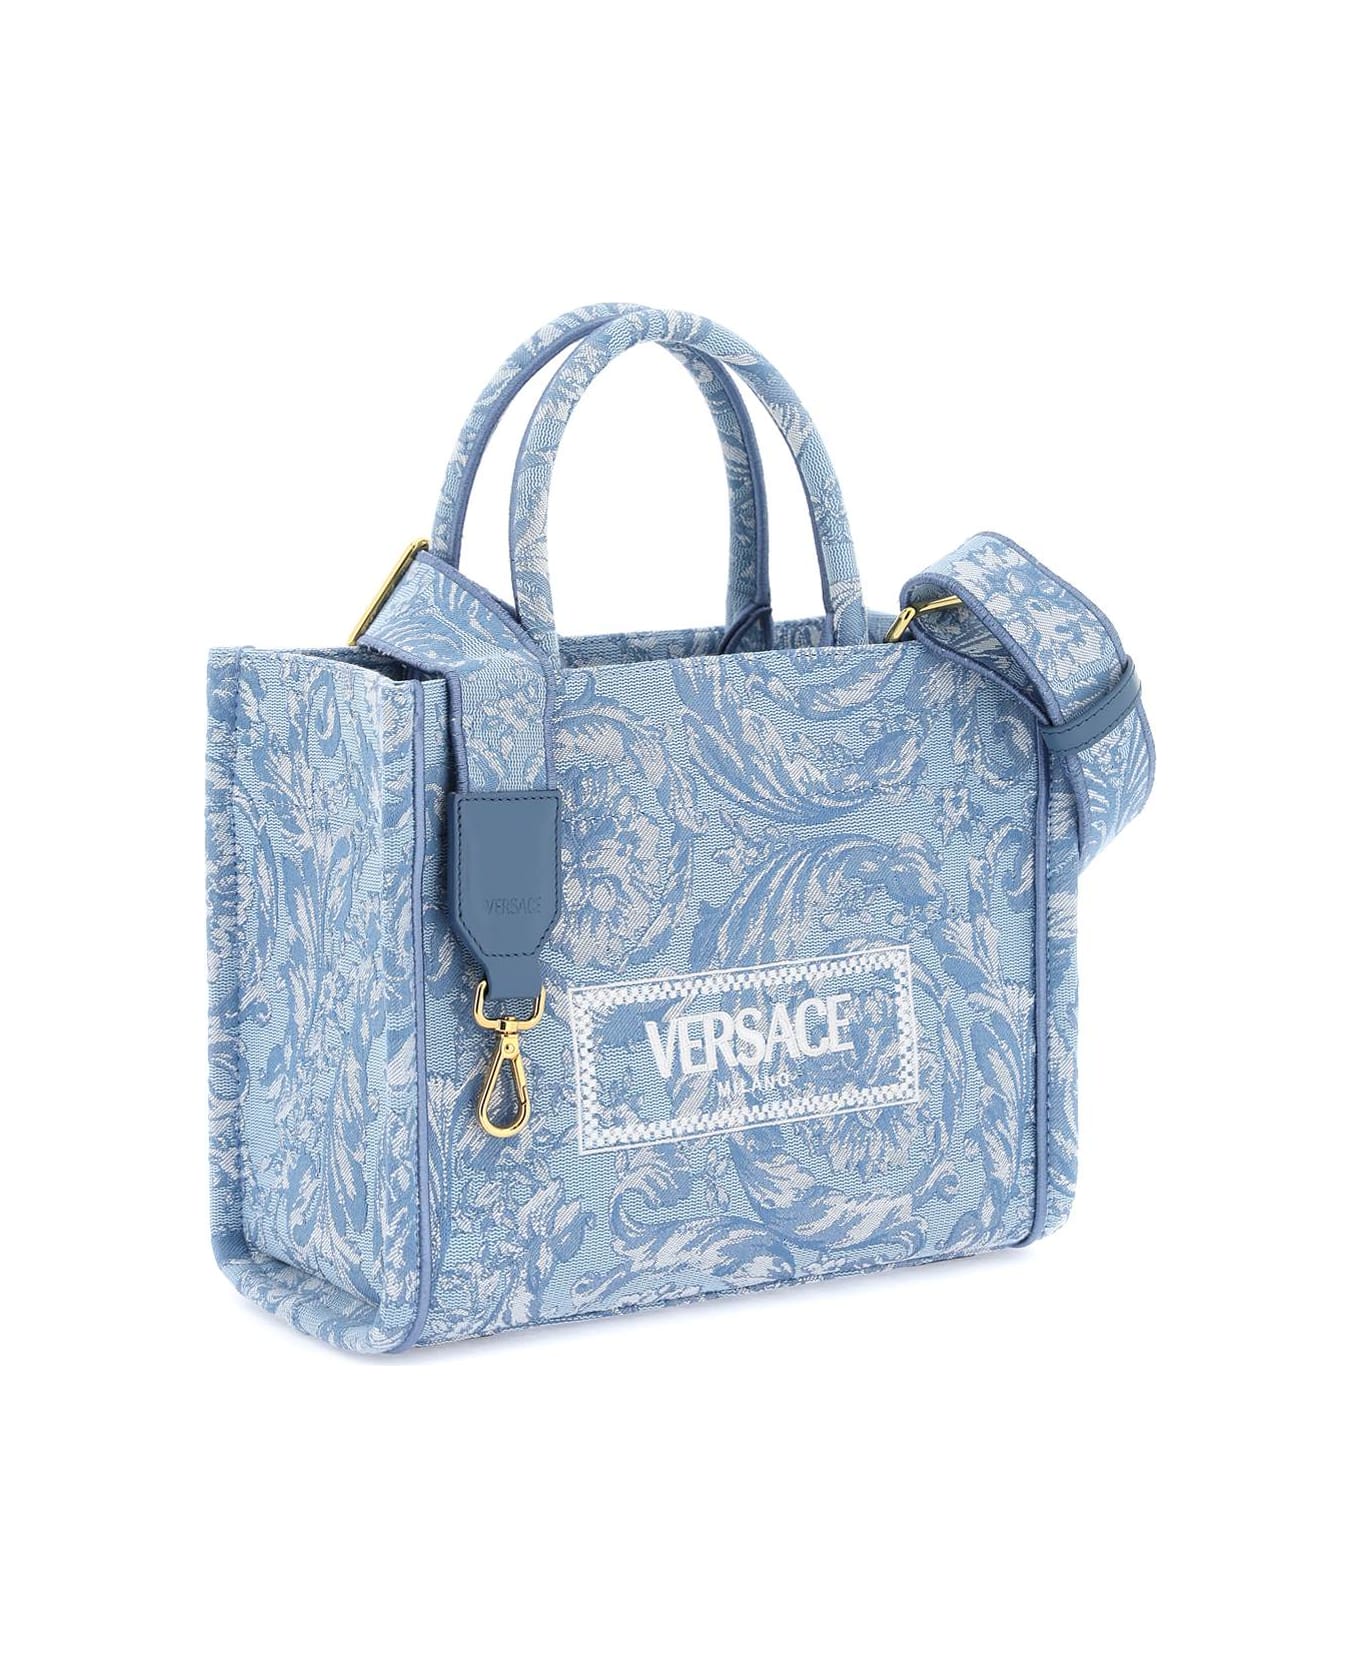 Versace Athena Barocco Small Tote Bag - BABY BLUE GENTIAN BLUE ORO VERSACE (Light blue) トートバッグ